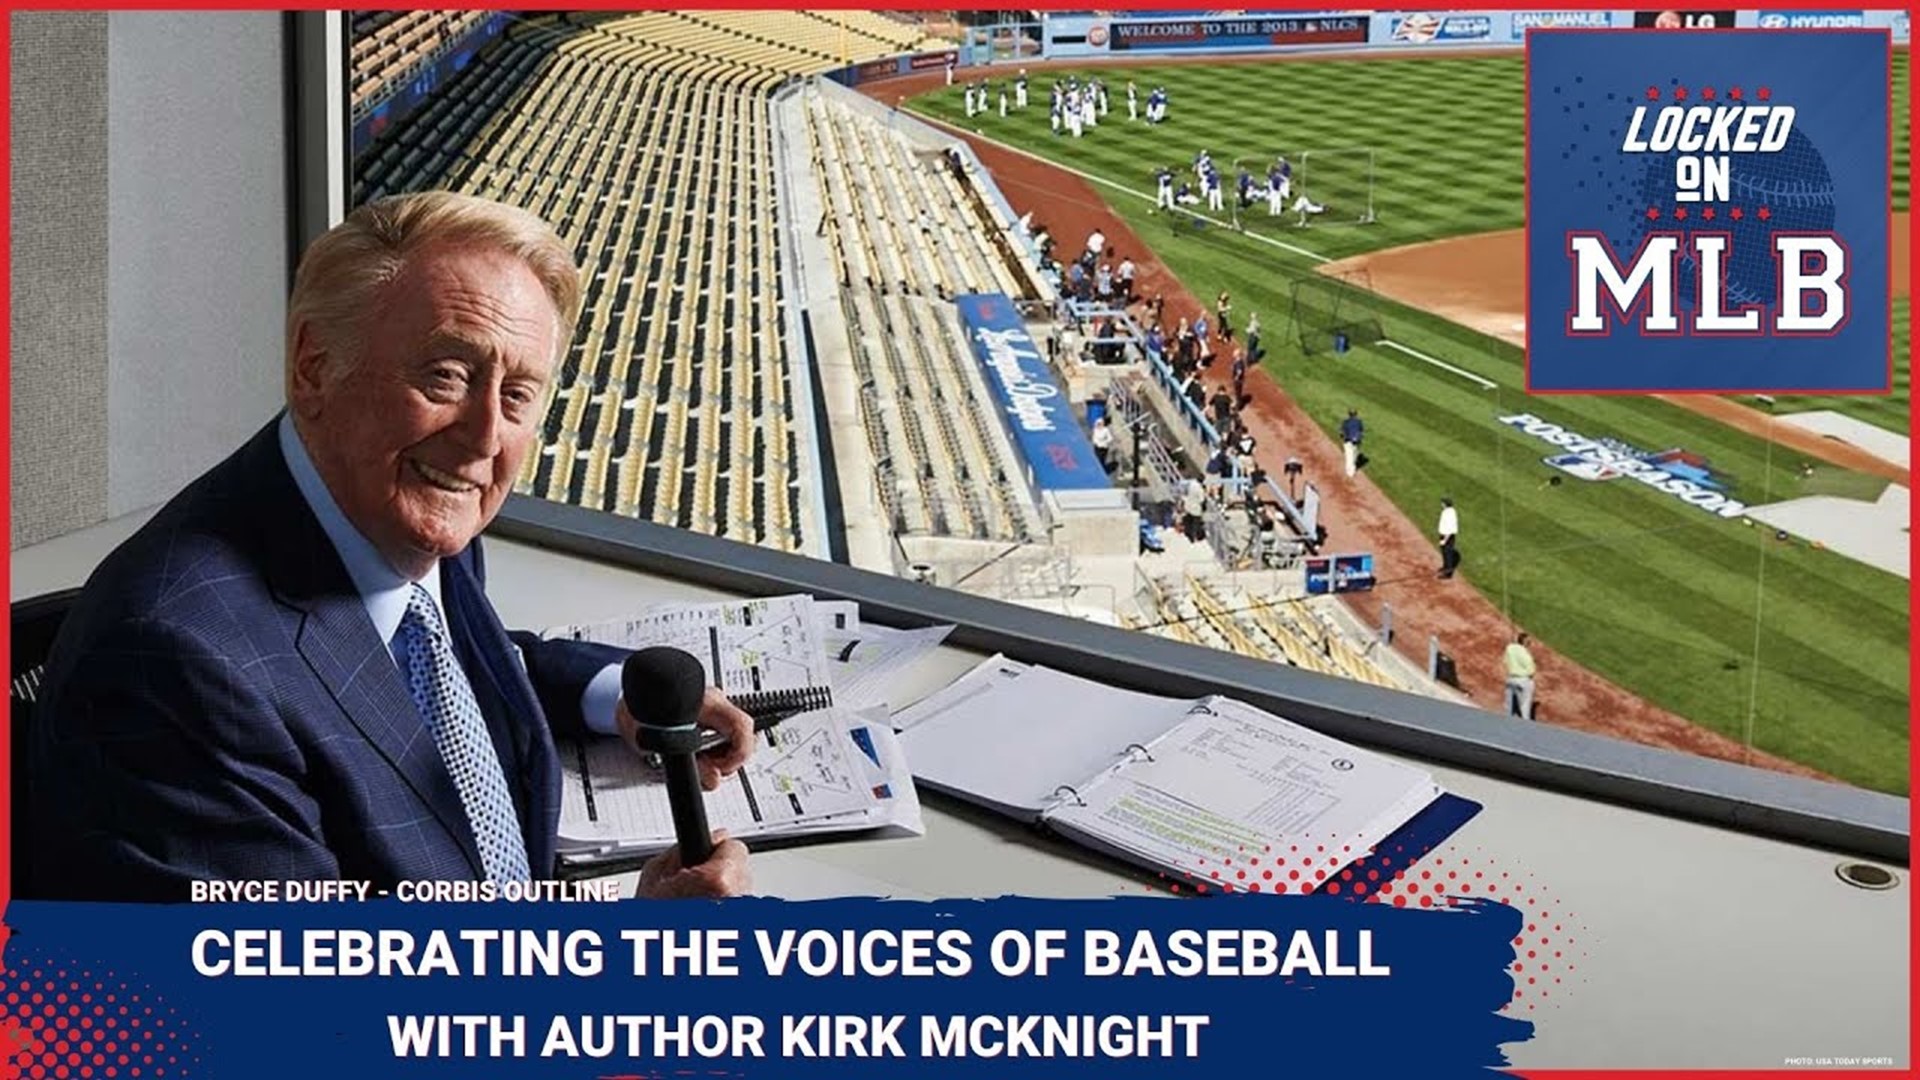 Locked on MLB - Celebrating the Voices of Baseball with Author Kirk McKnight